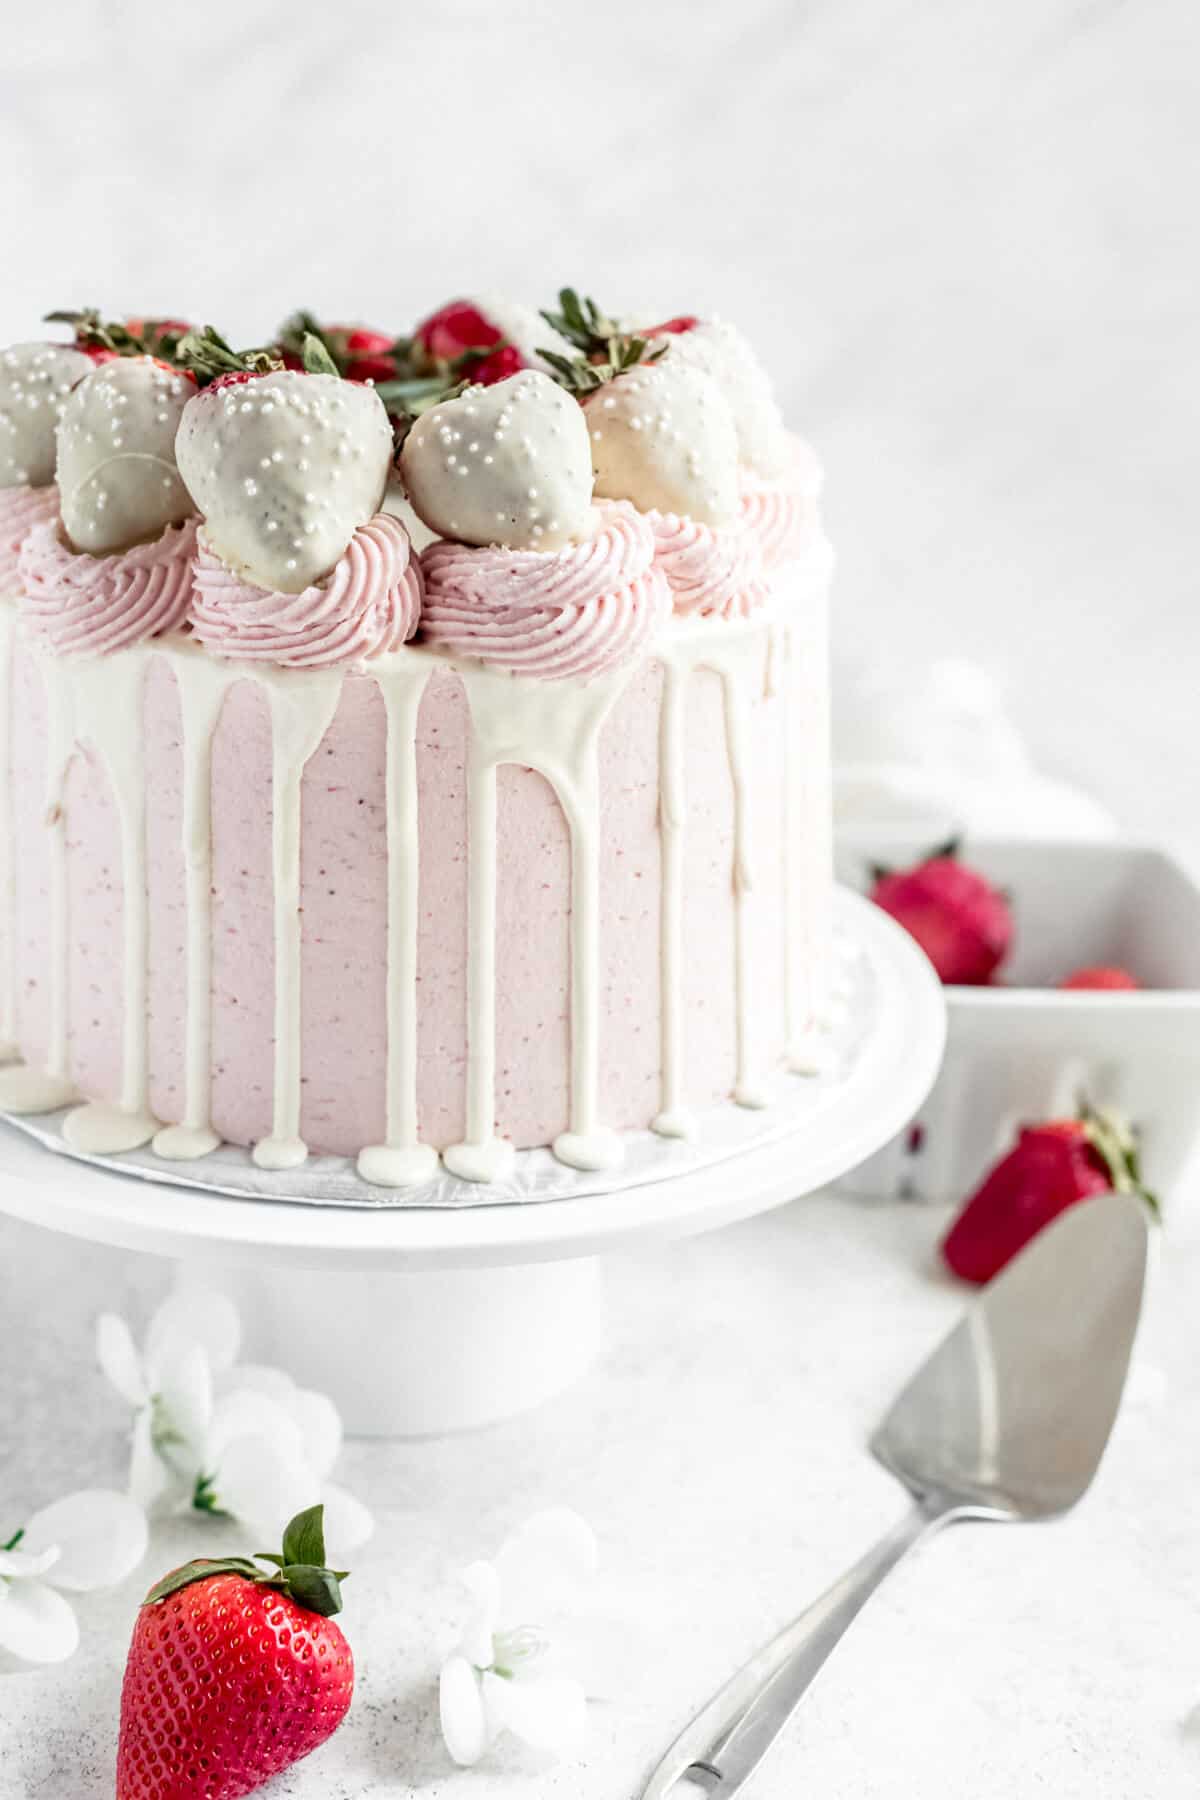 White Chocolate Covered Strawberry Cake Queenslee App 233 tit